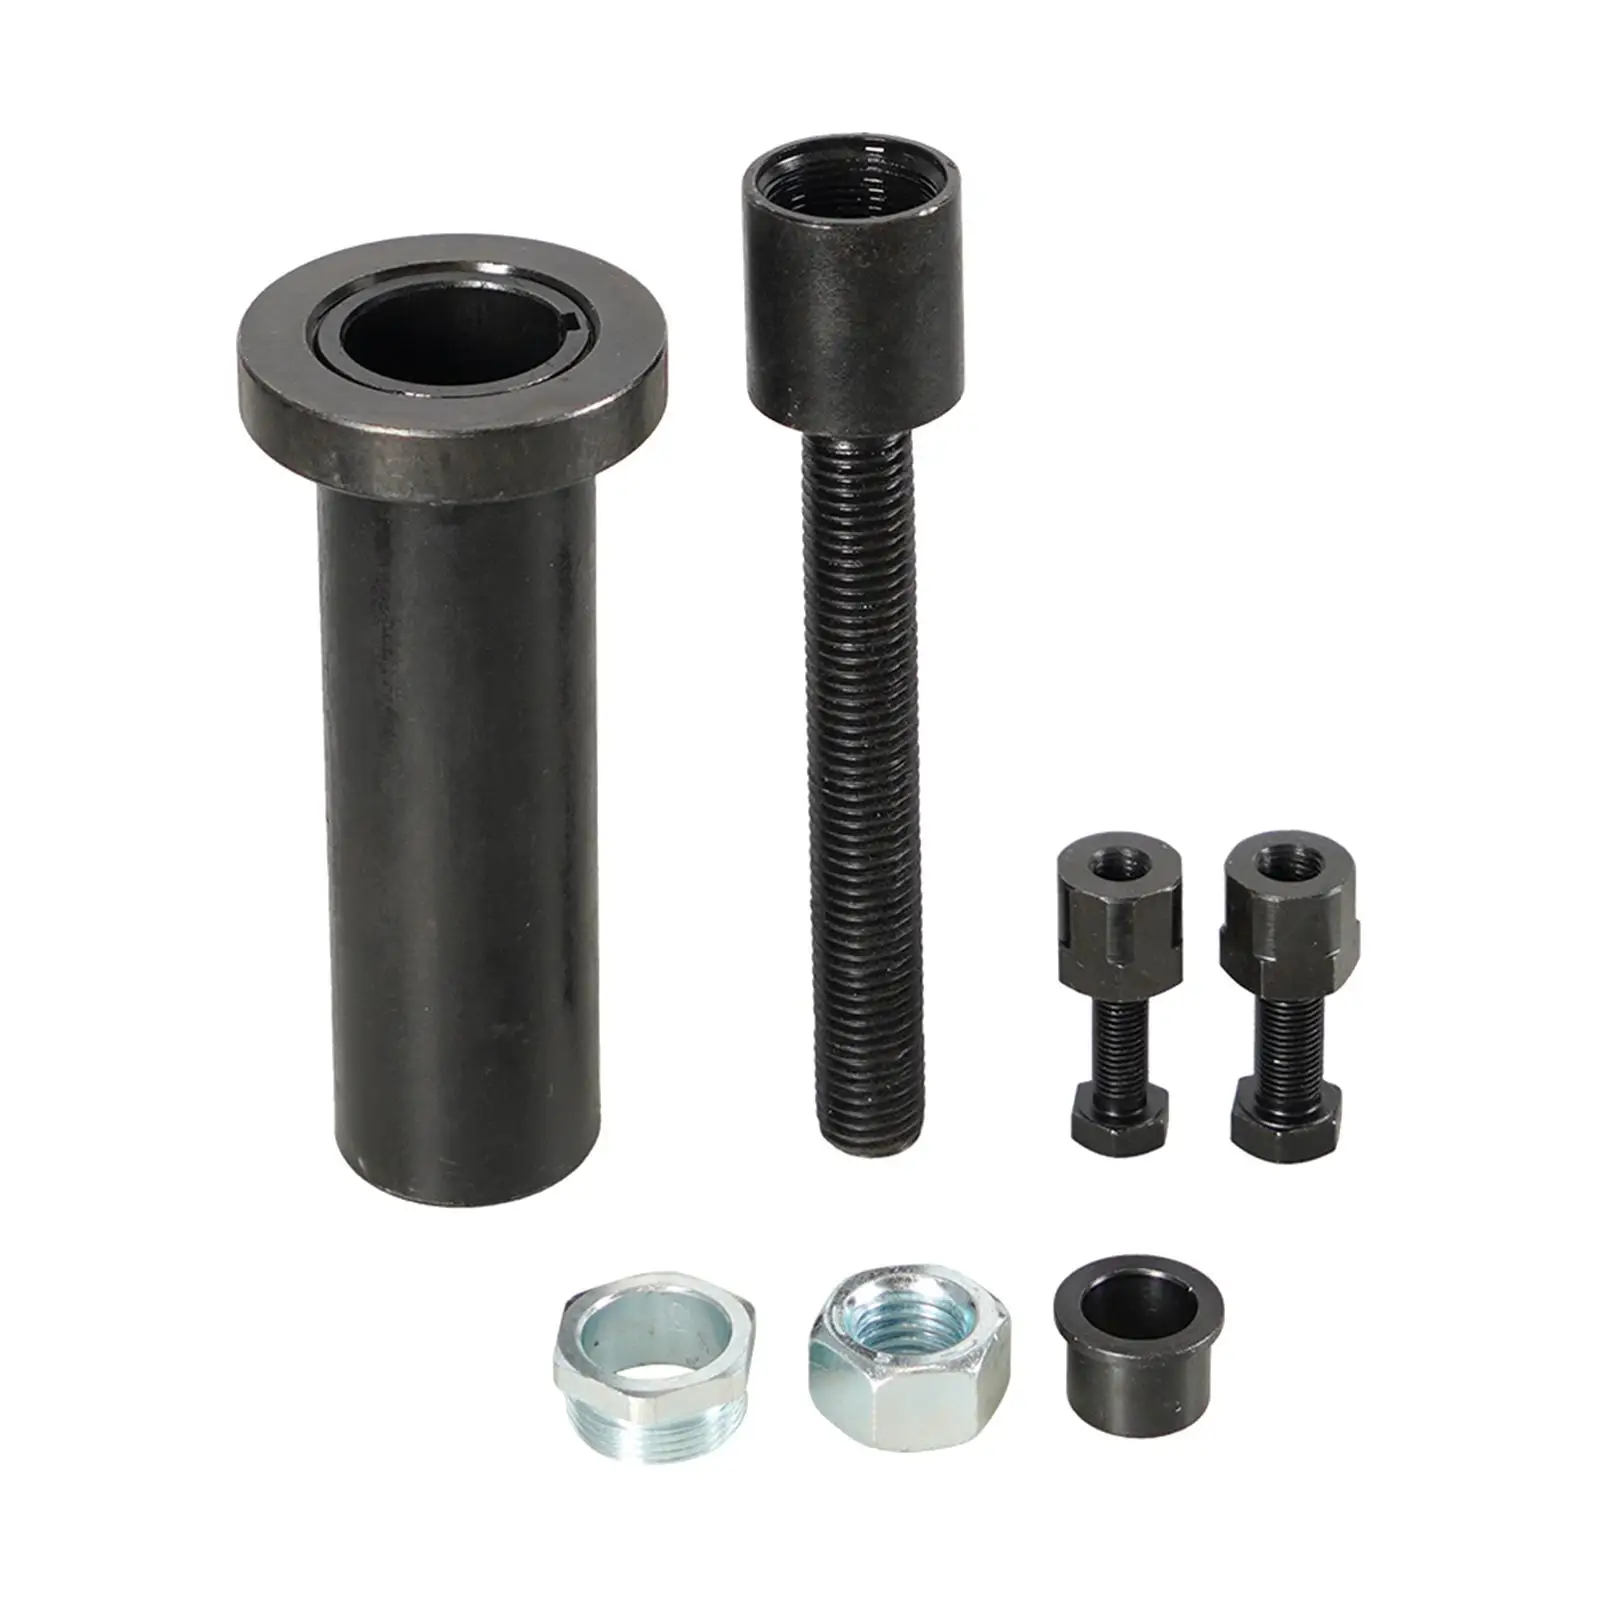 High Performance Crank Puller Installer Tool Direct Replacement Crank Pulley Tool for Dirt Bike Easy to Install Supplies